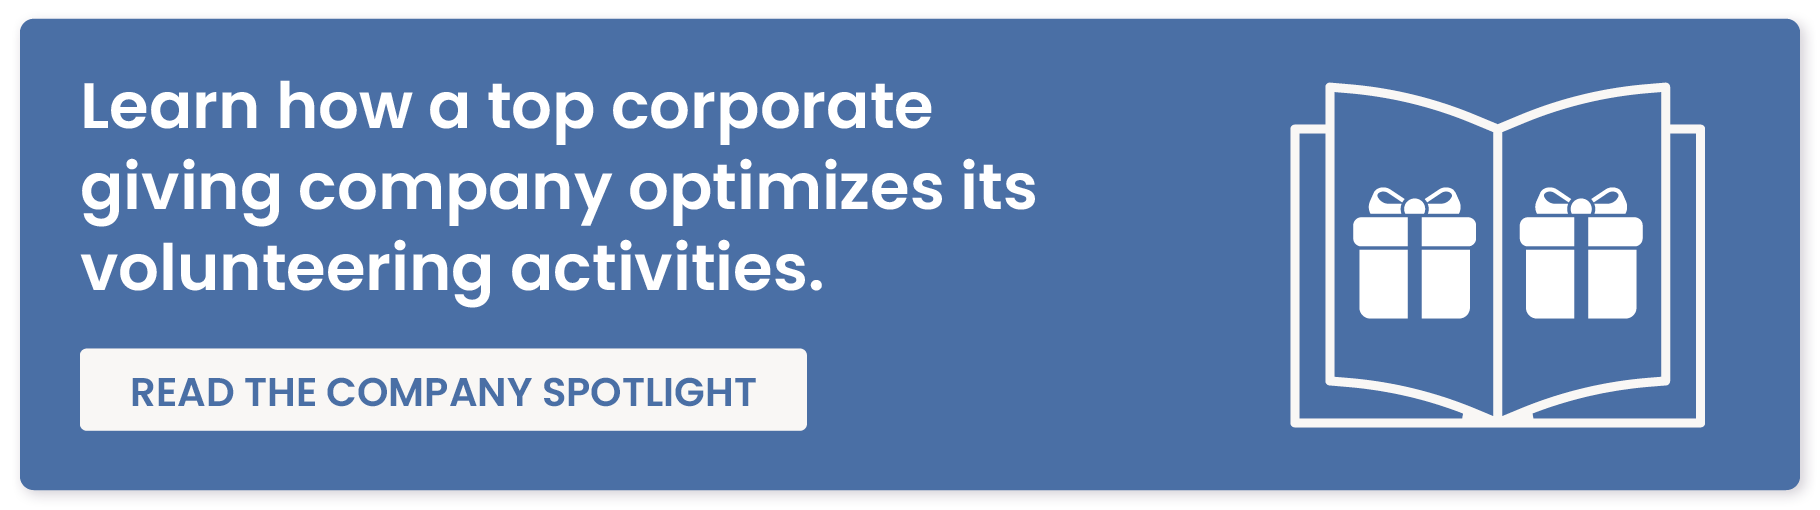 Learn how a top corporate giving company optimizes its volunteering activities. Read the company spotlight.